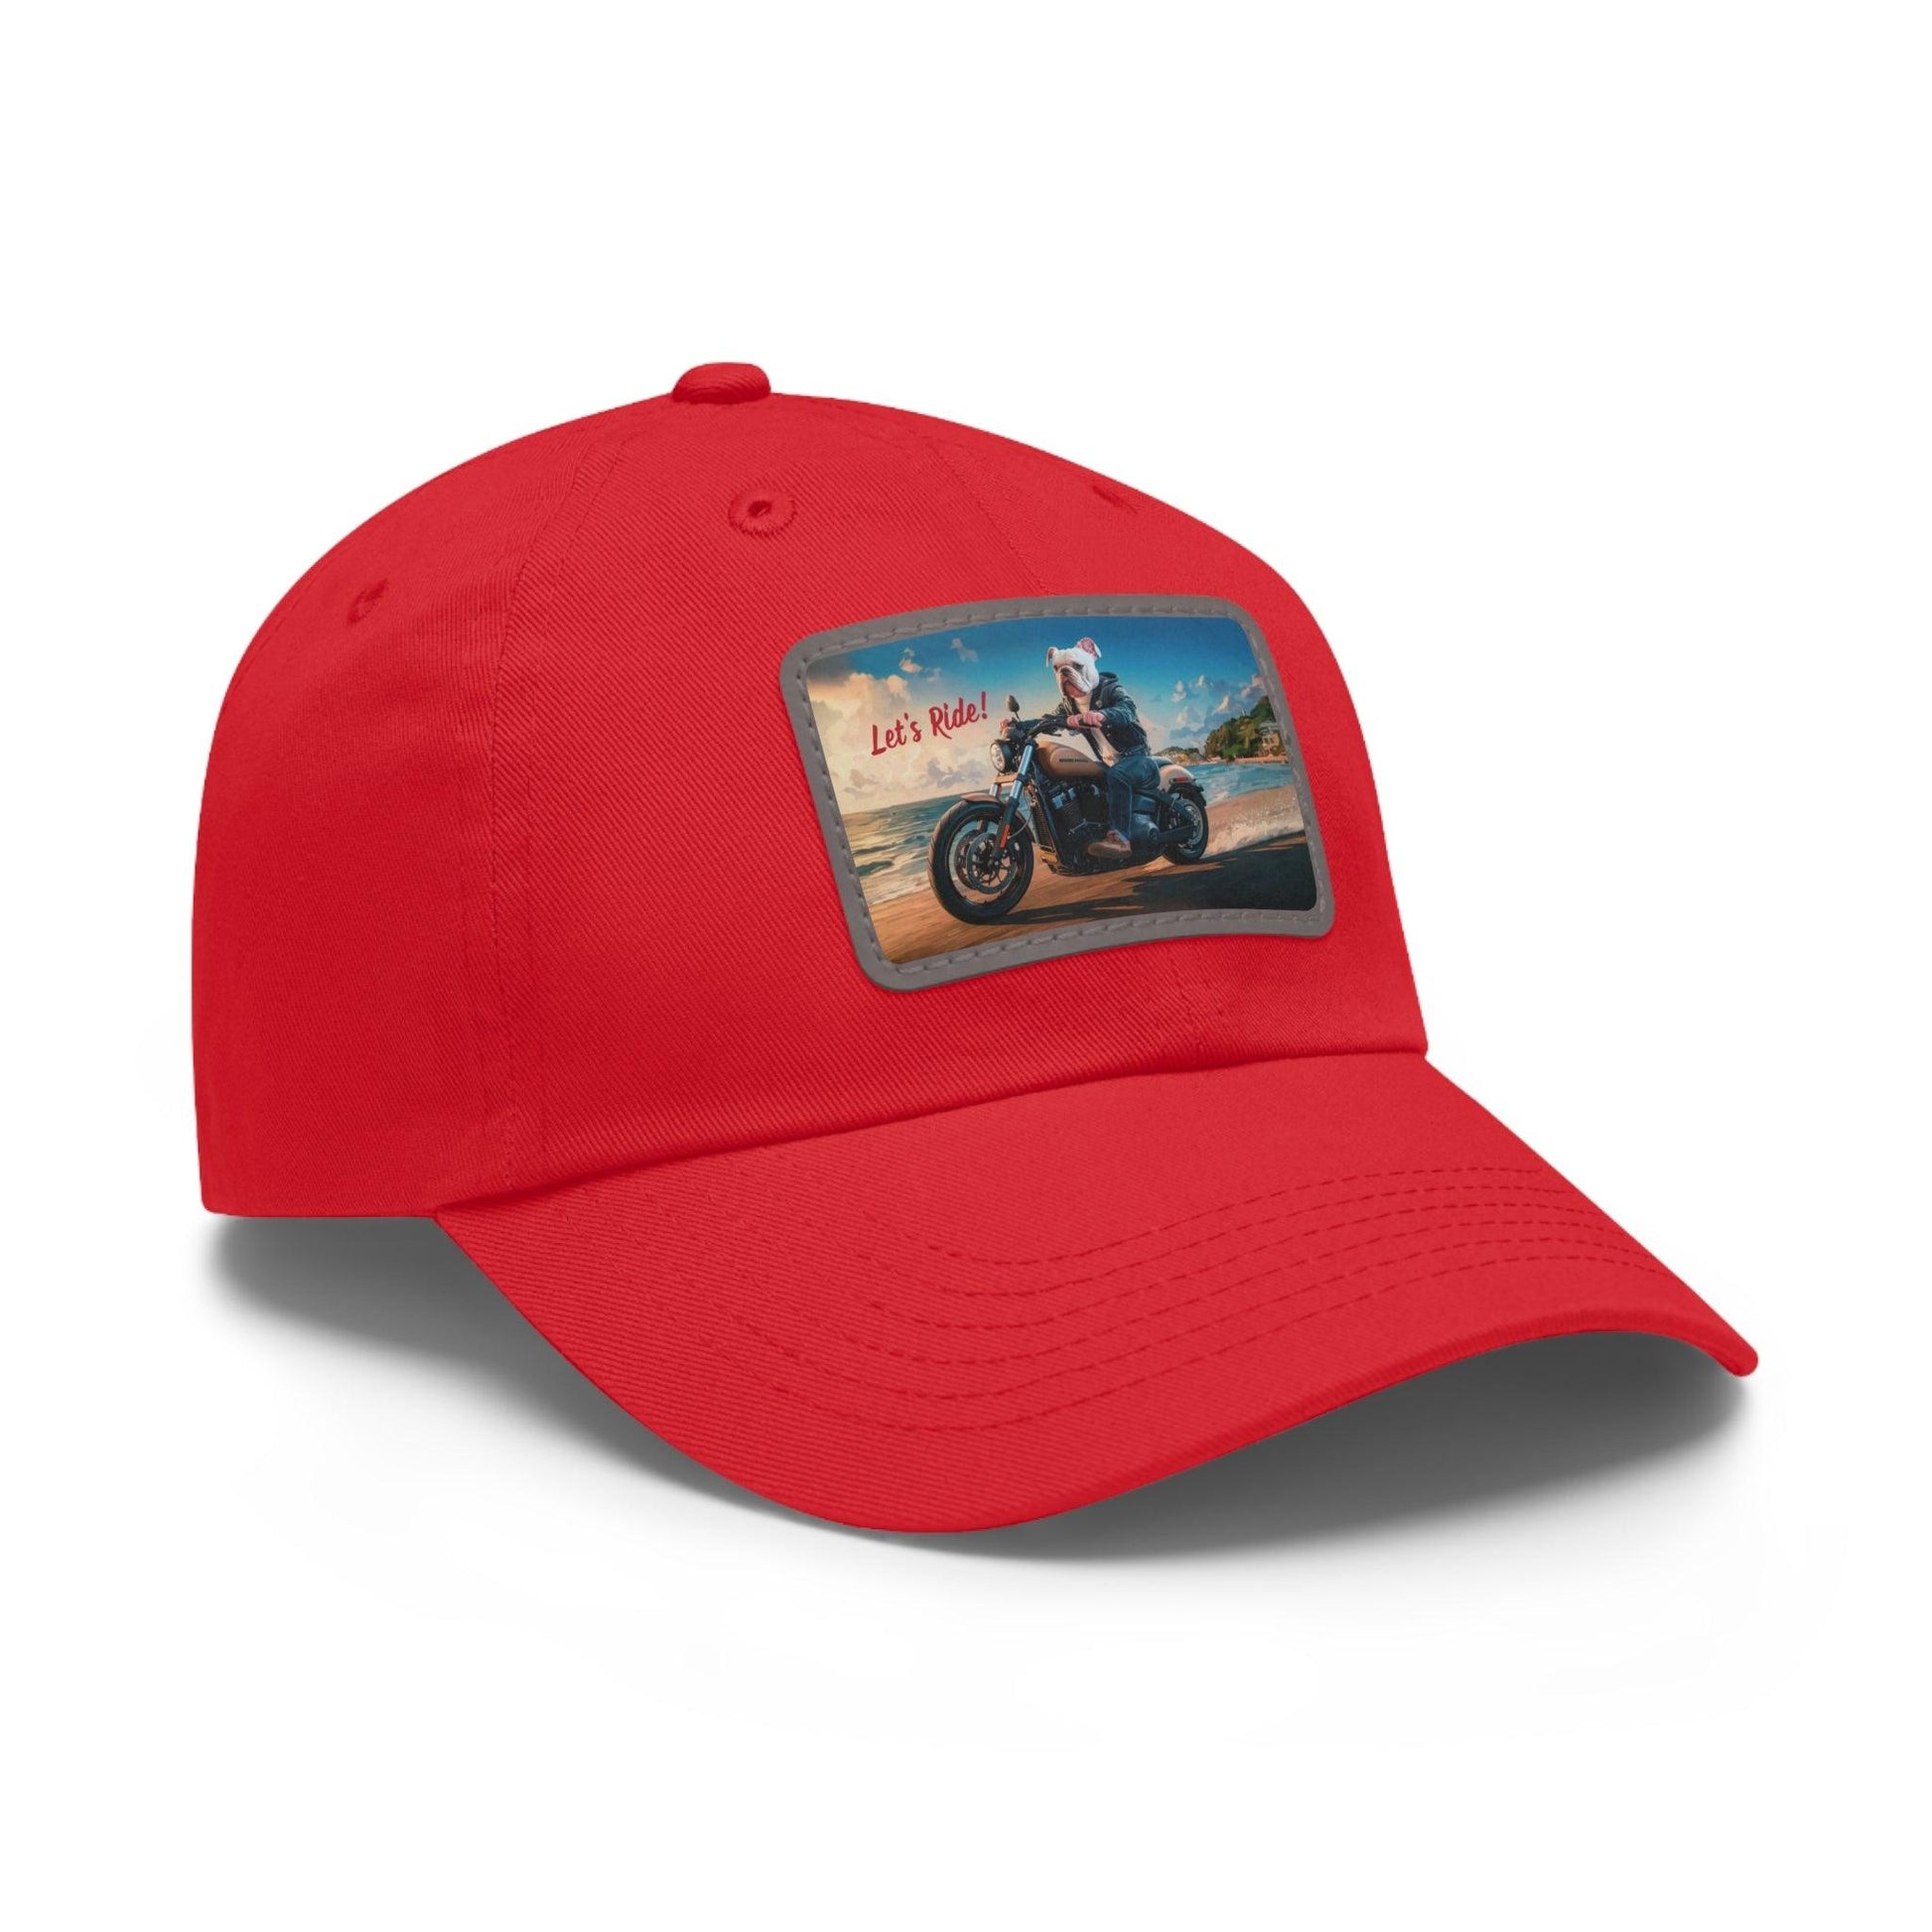 Let's Ride Bulldog Riding Motorcycle Cap, Dad Hat with Leather Patch (Rectangle) - Coastal Collections